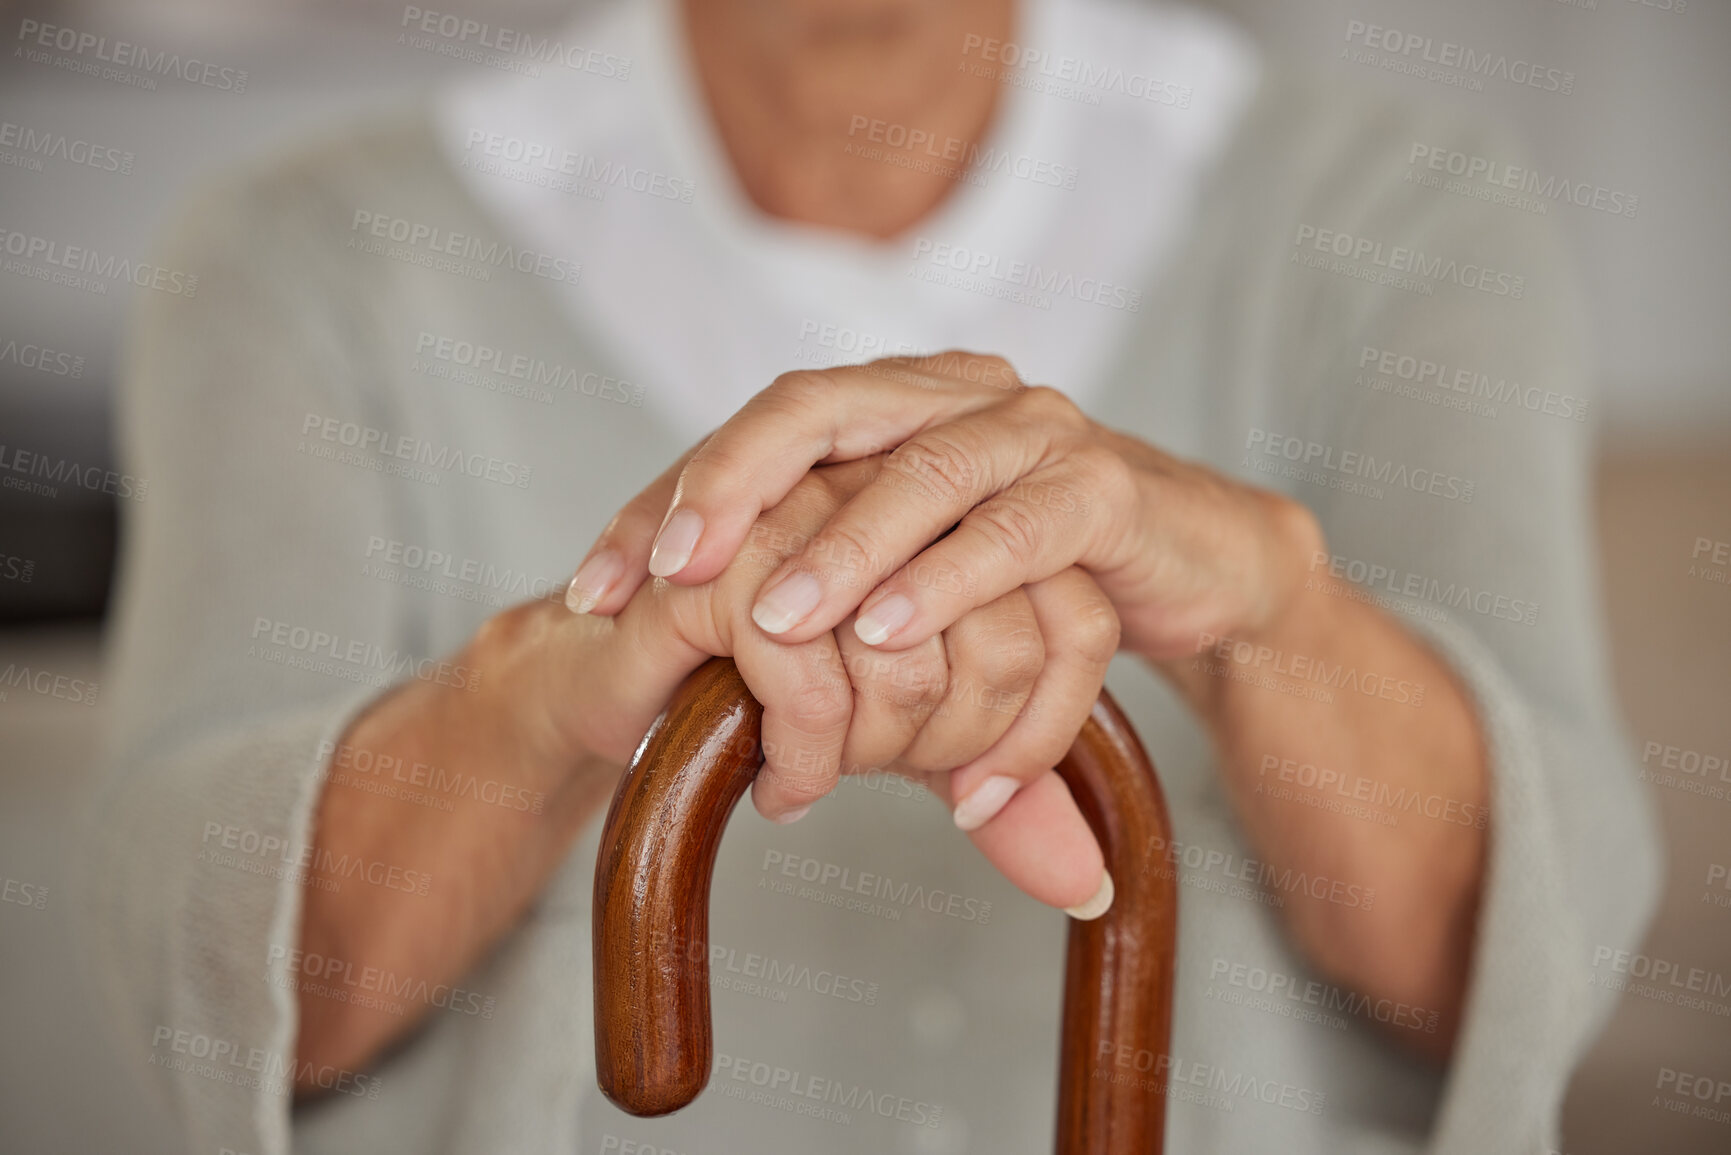 Buy stock photo Closeup of a seniors hands, disabled woman holding a cane in a nursing home. An elderly lady needing a walking aid or support, a crutch to lean on after having a stroke at an assisted living facility